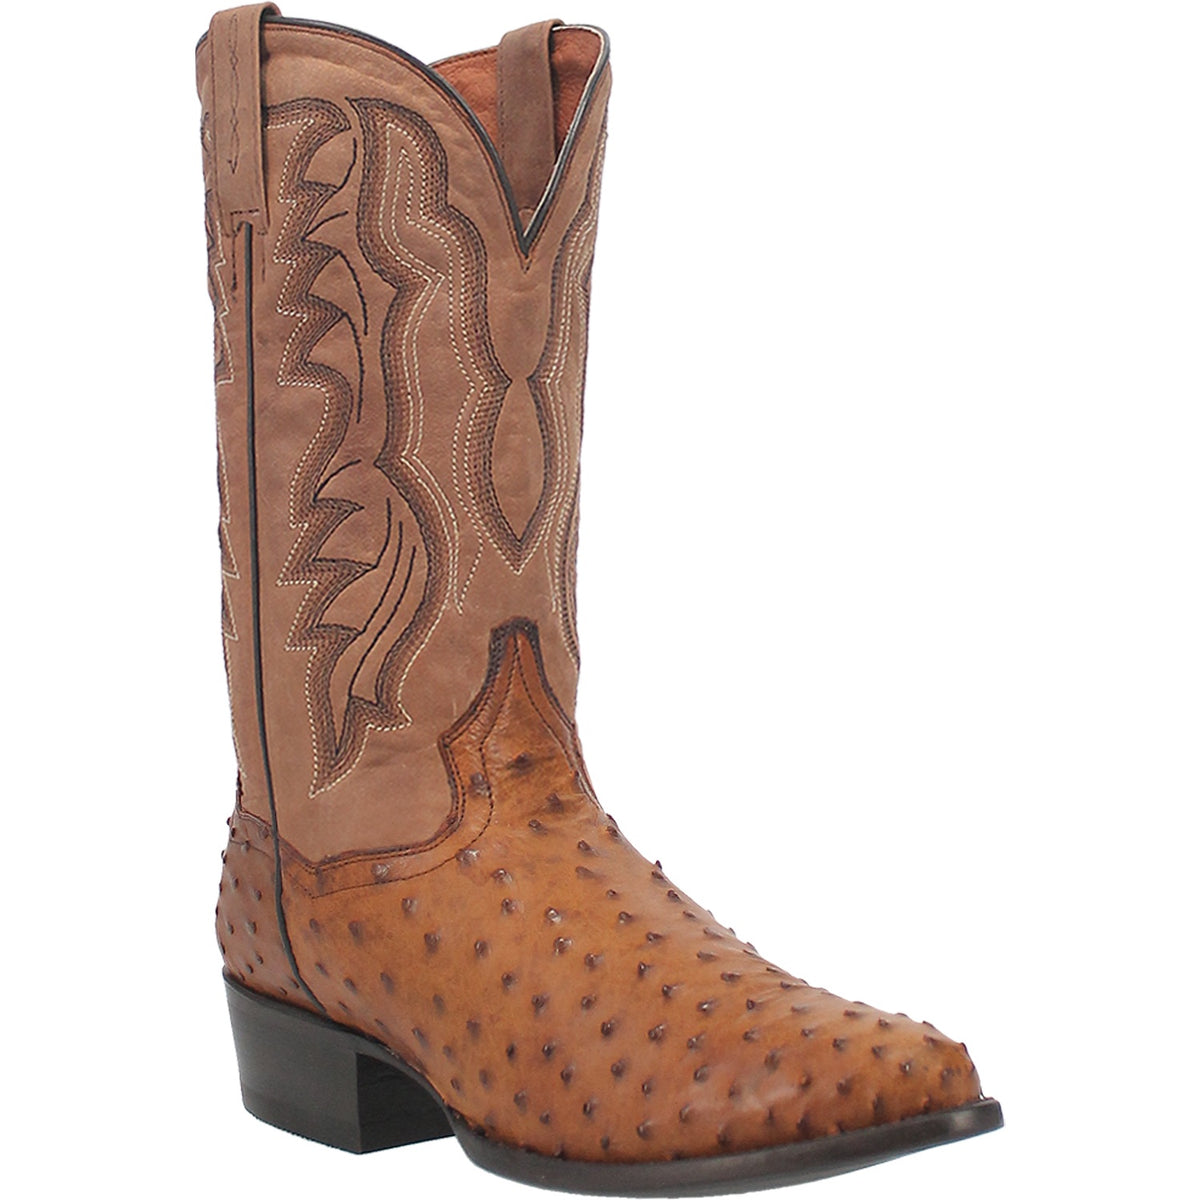 TEMPE FULL QUILL OSTRICH BOOT Cover